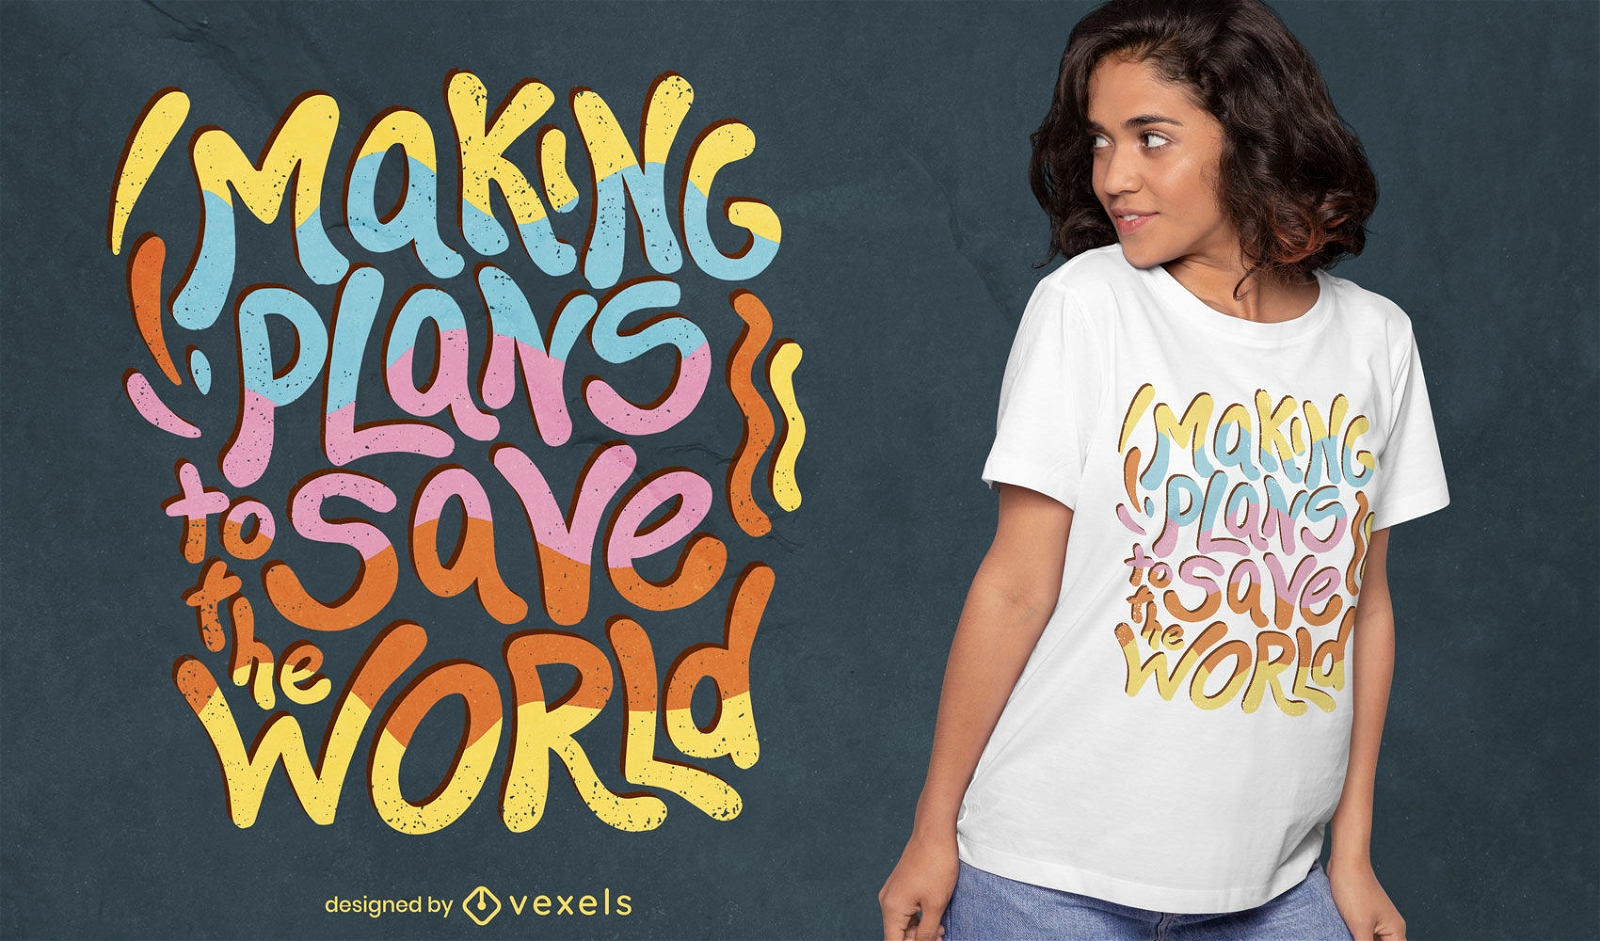 Save the world lettering t-shirt design